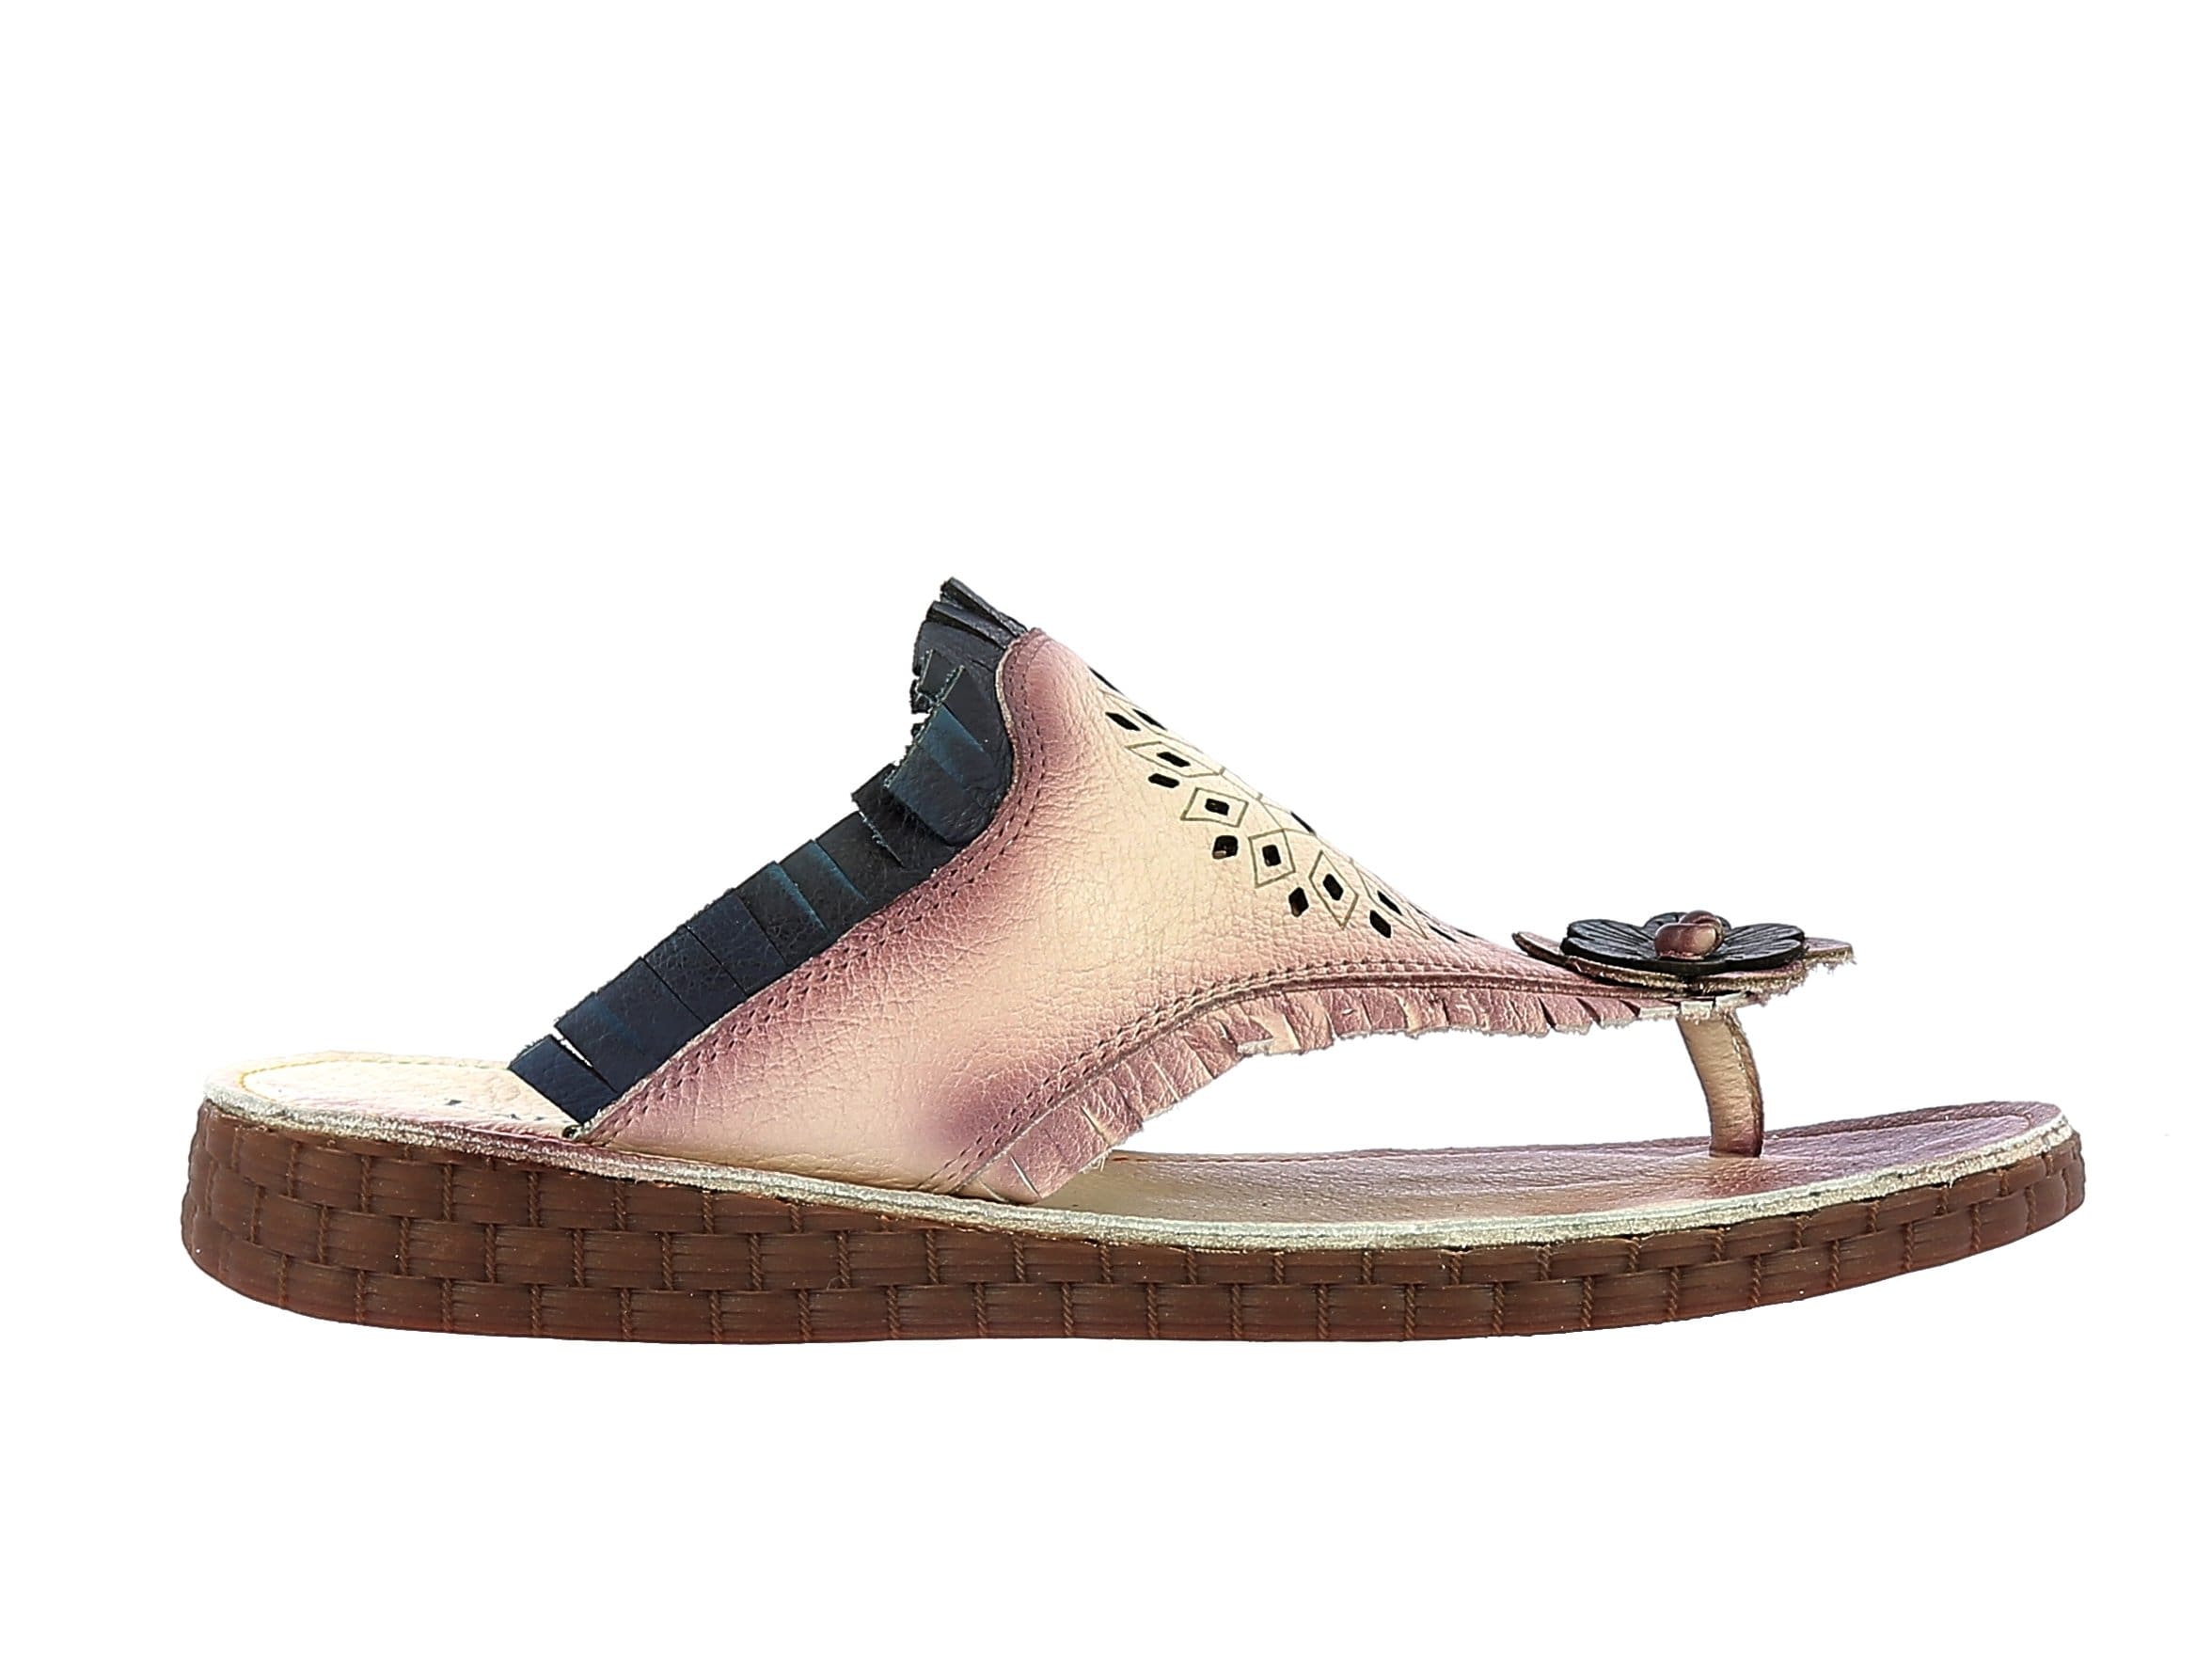 Chaussures HECZO 02 - 35 / BEIGE - Mule